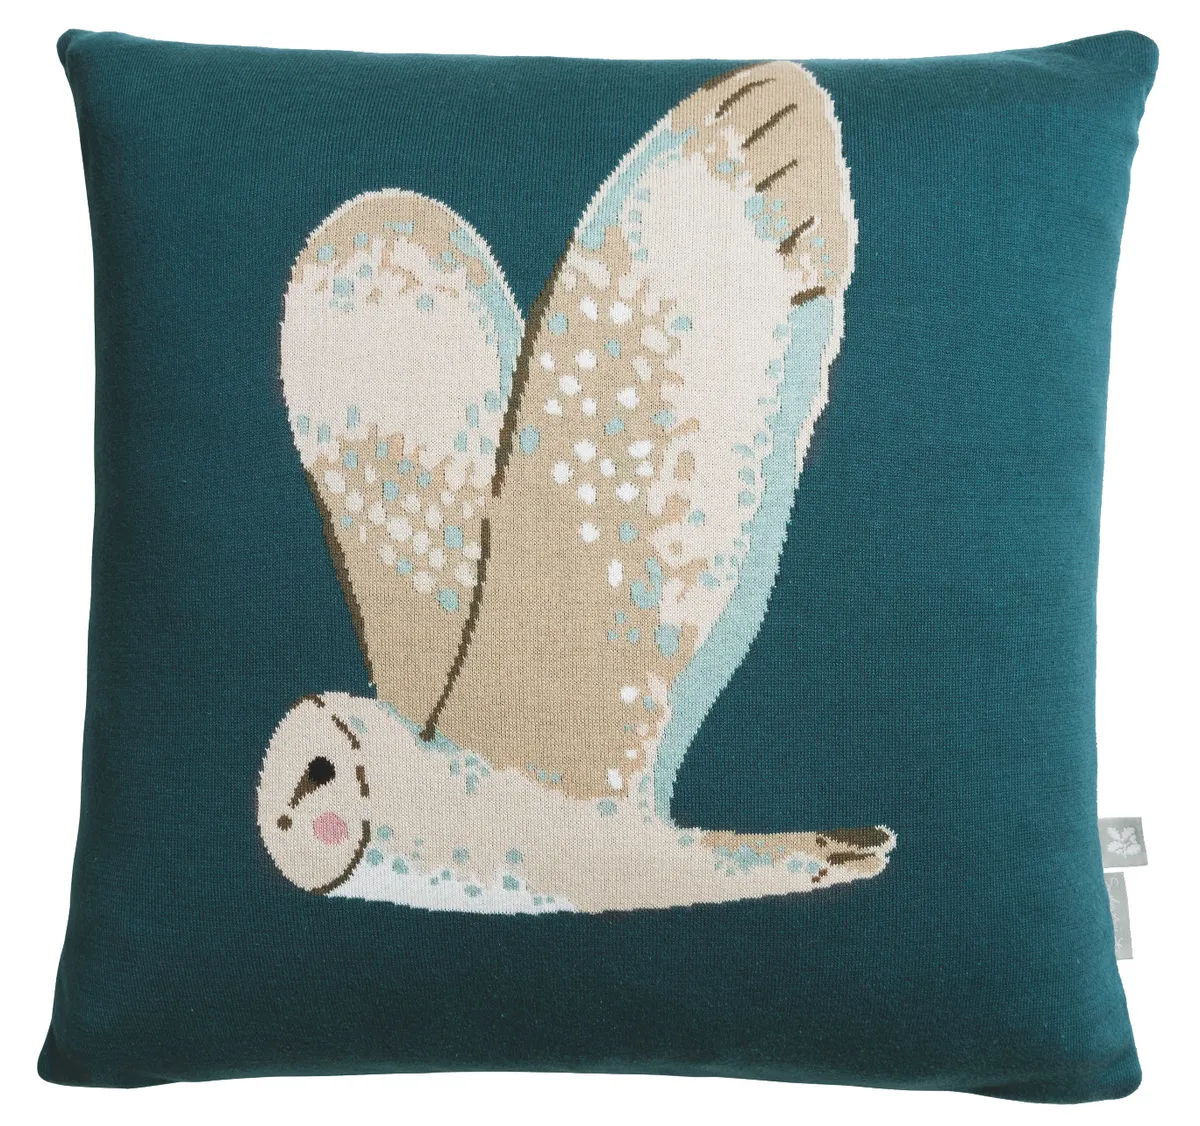 Owl knitted cushion, £49, Sophie Allport